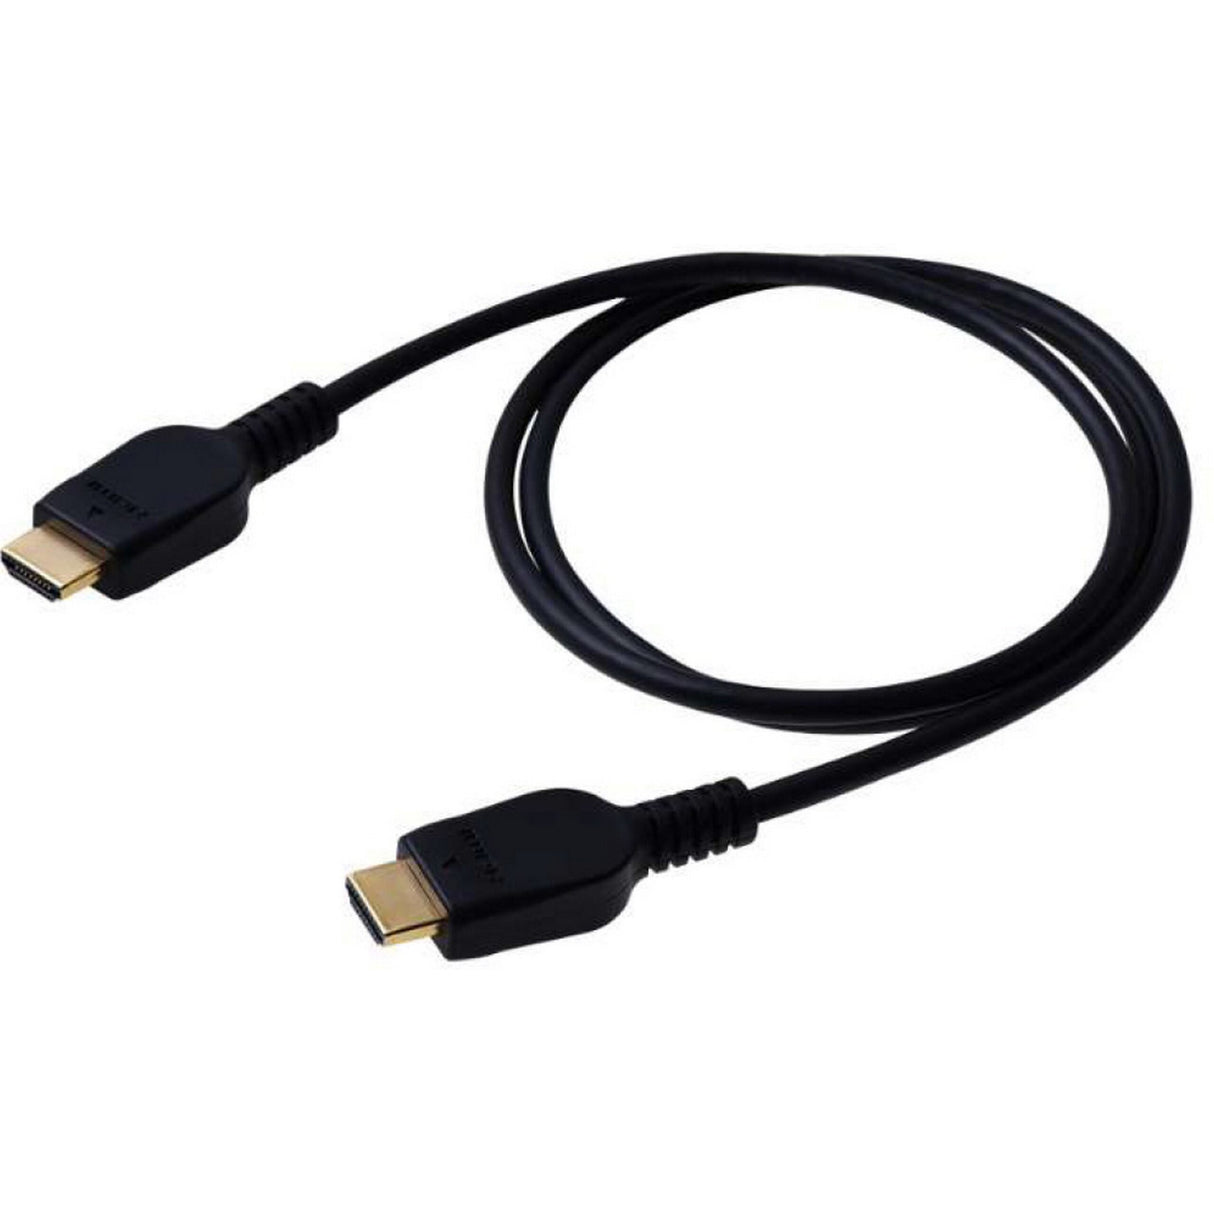 Connectronics Ultra High Speed HDMI 2.1 Cable for 4K/8K, 1 Meter